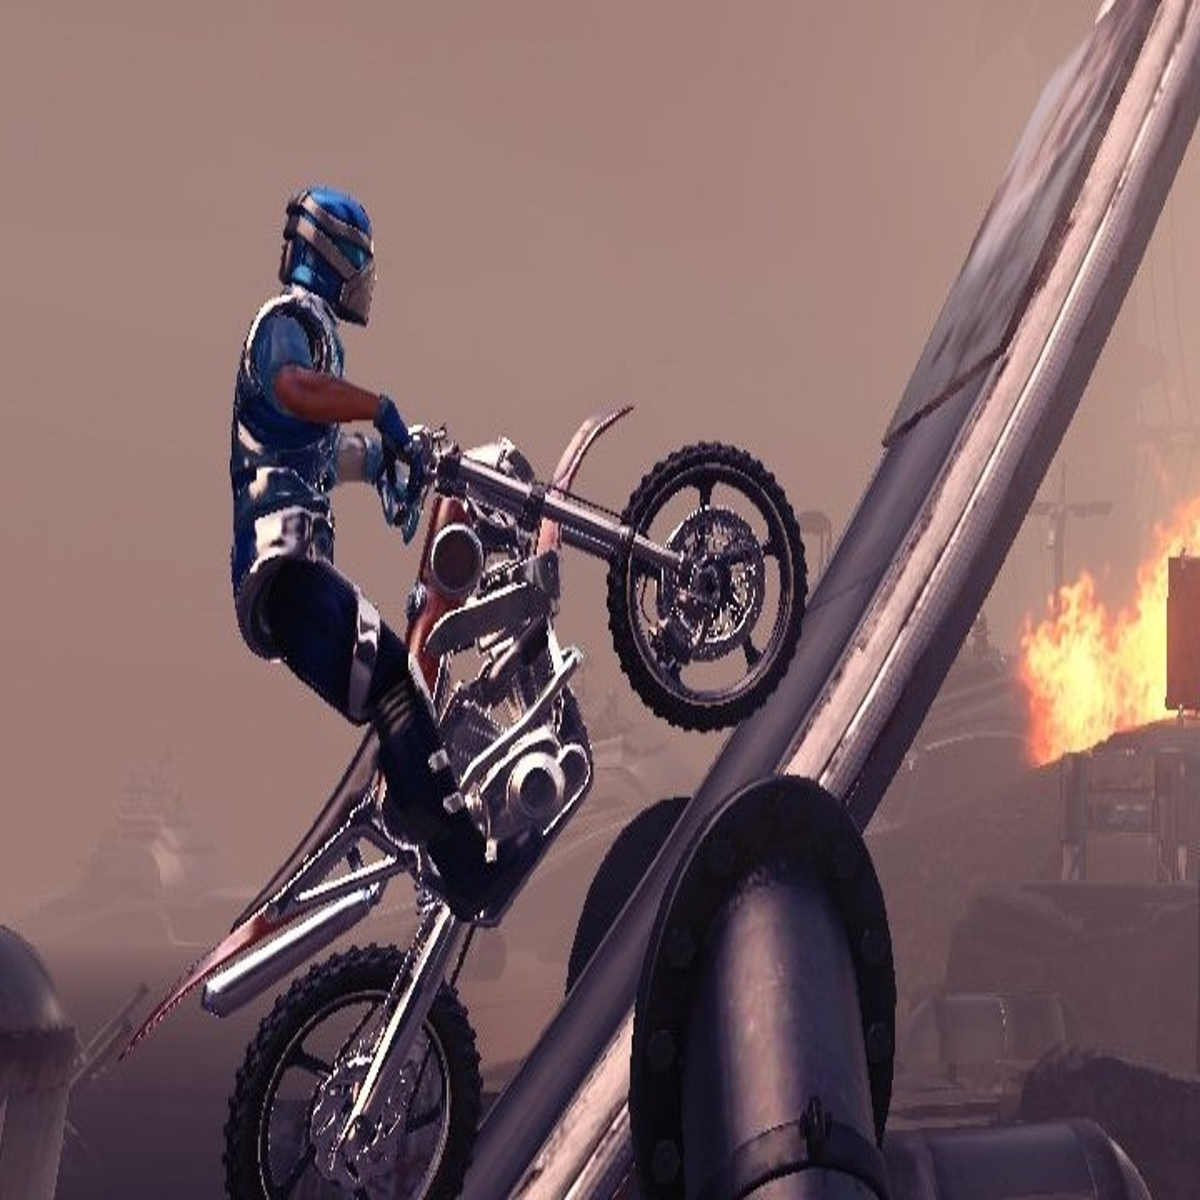 Ubisoft on X: Get your Trials Fusion-inspired Minecraft: Xbox 360 Edition  skins this Wednesday on Xbox Live Marketplace  / X